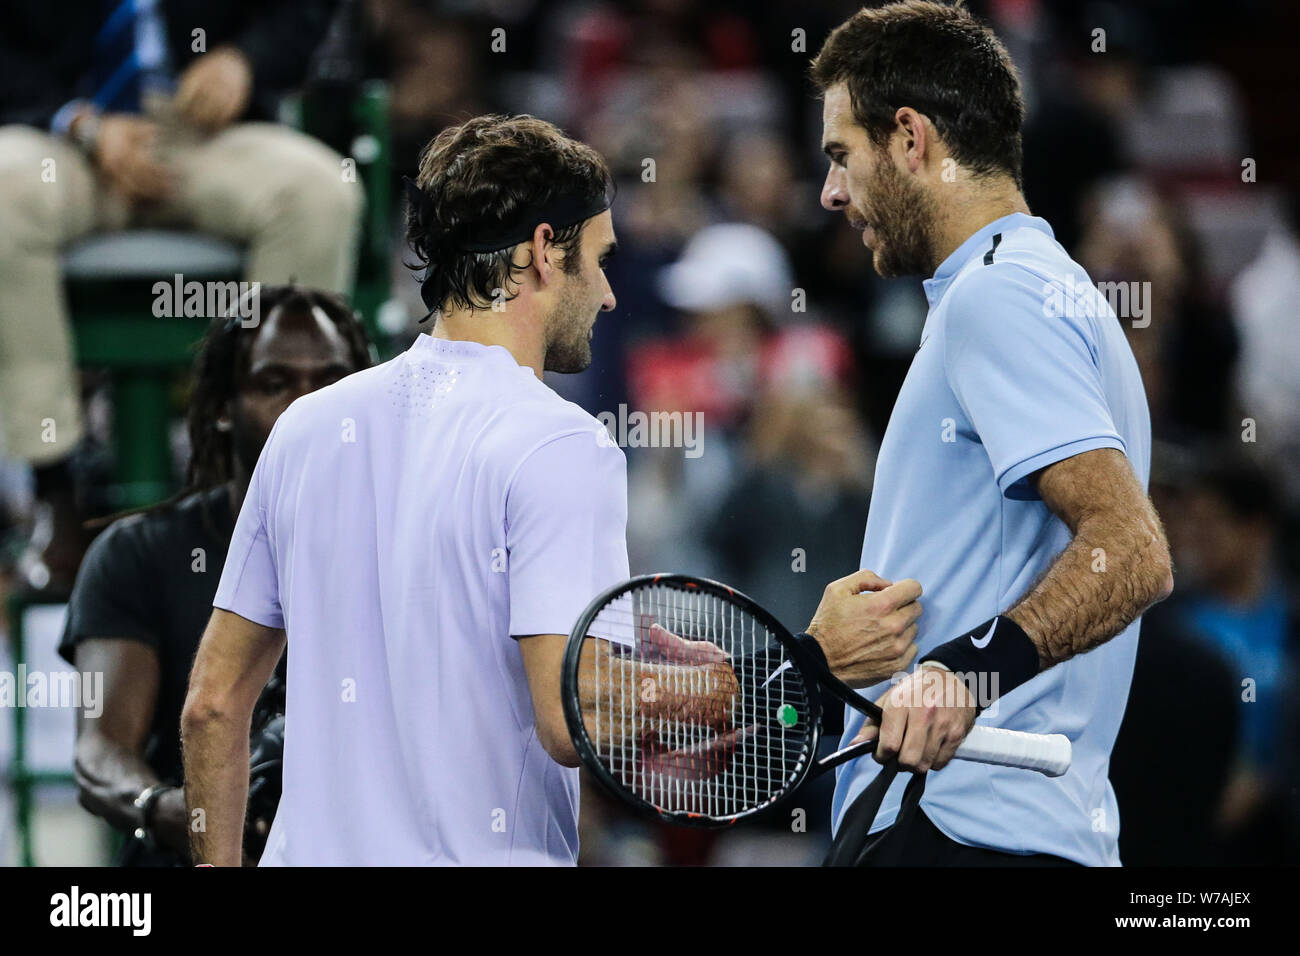 Roger Federer of Switzerland interacts with Juan Martin Del Potro, or Delpo,  of Argentina after their semifinal of men's singles during the Shanghai R  Stock Photo - Alamy